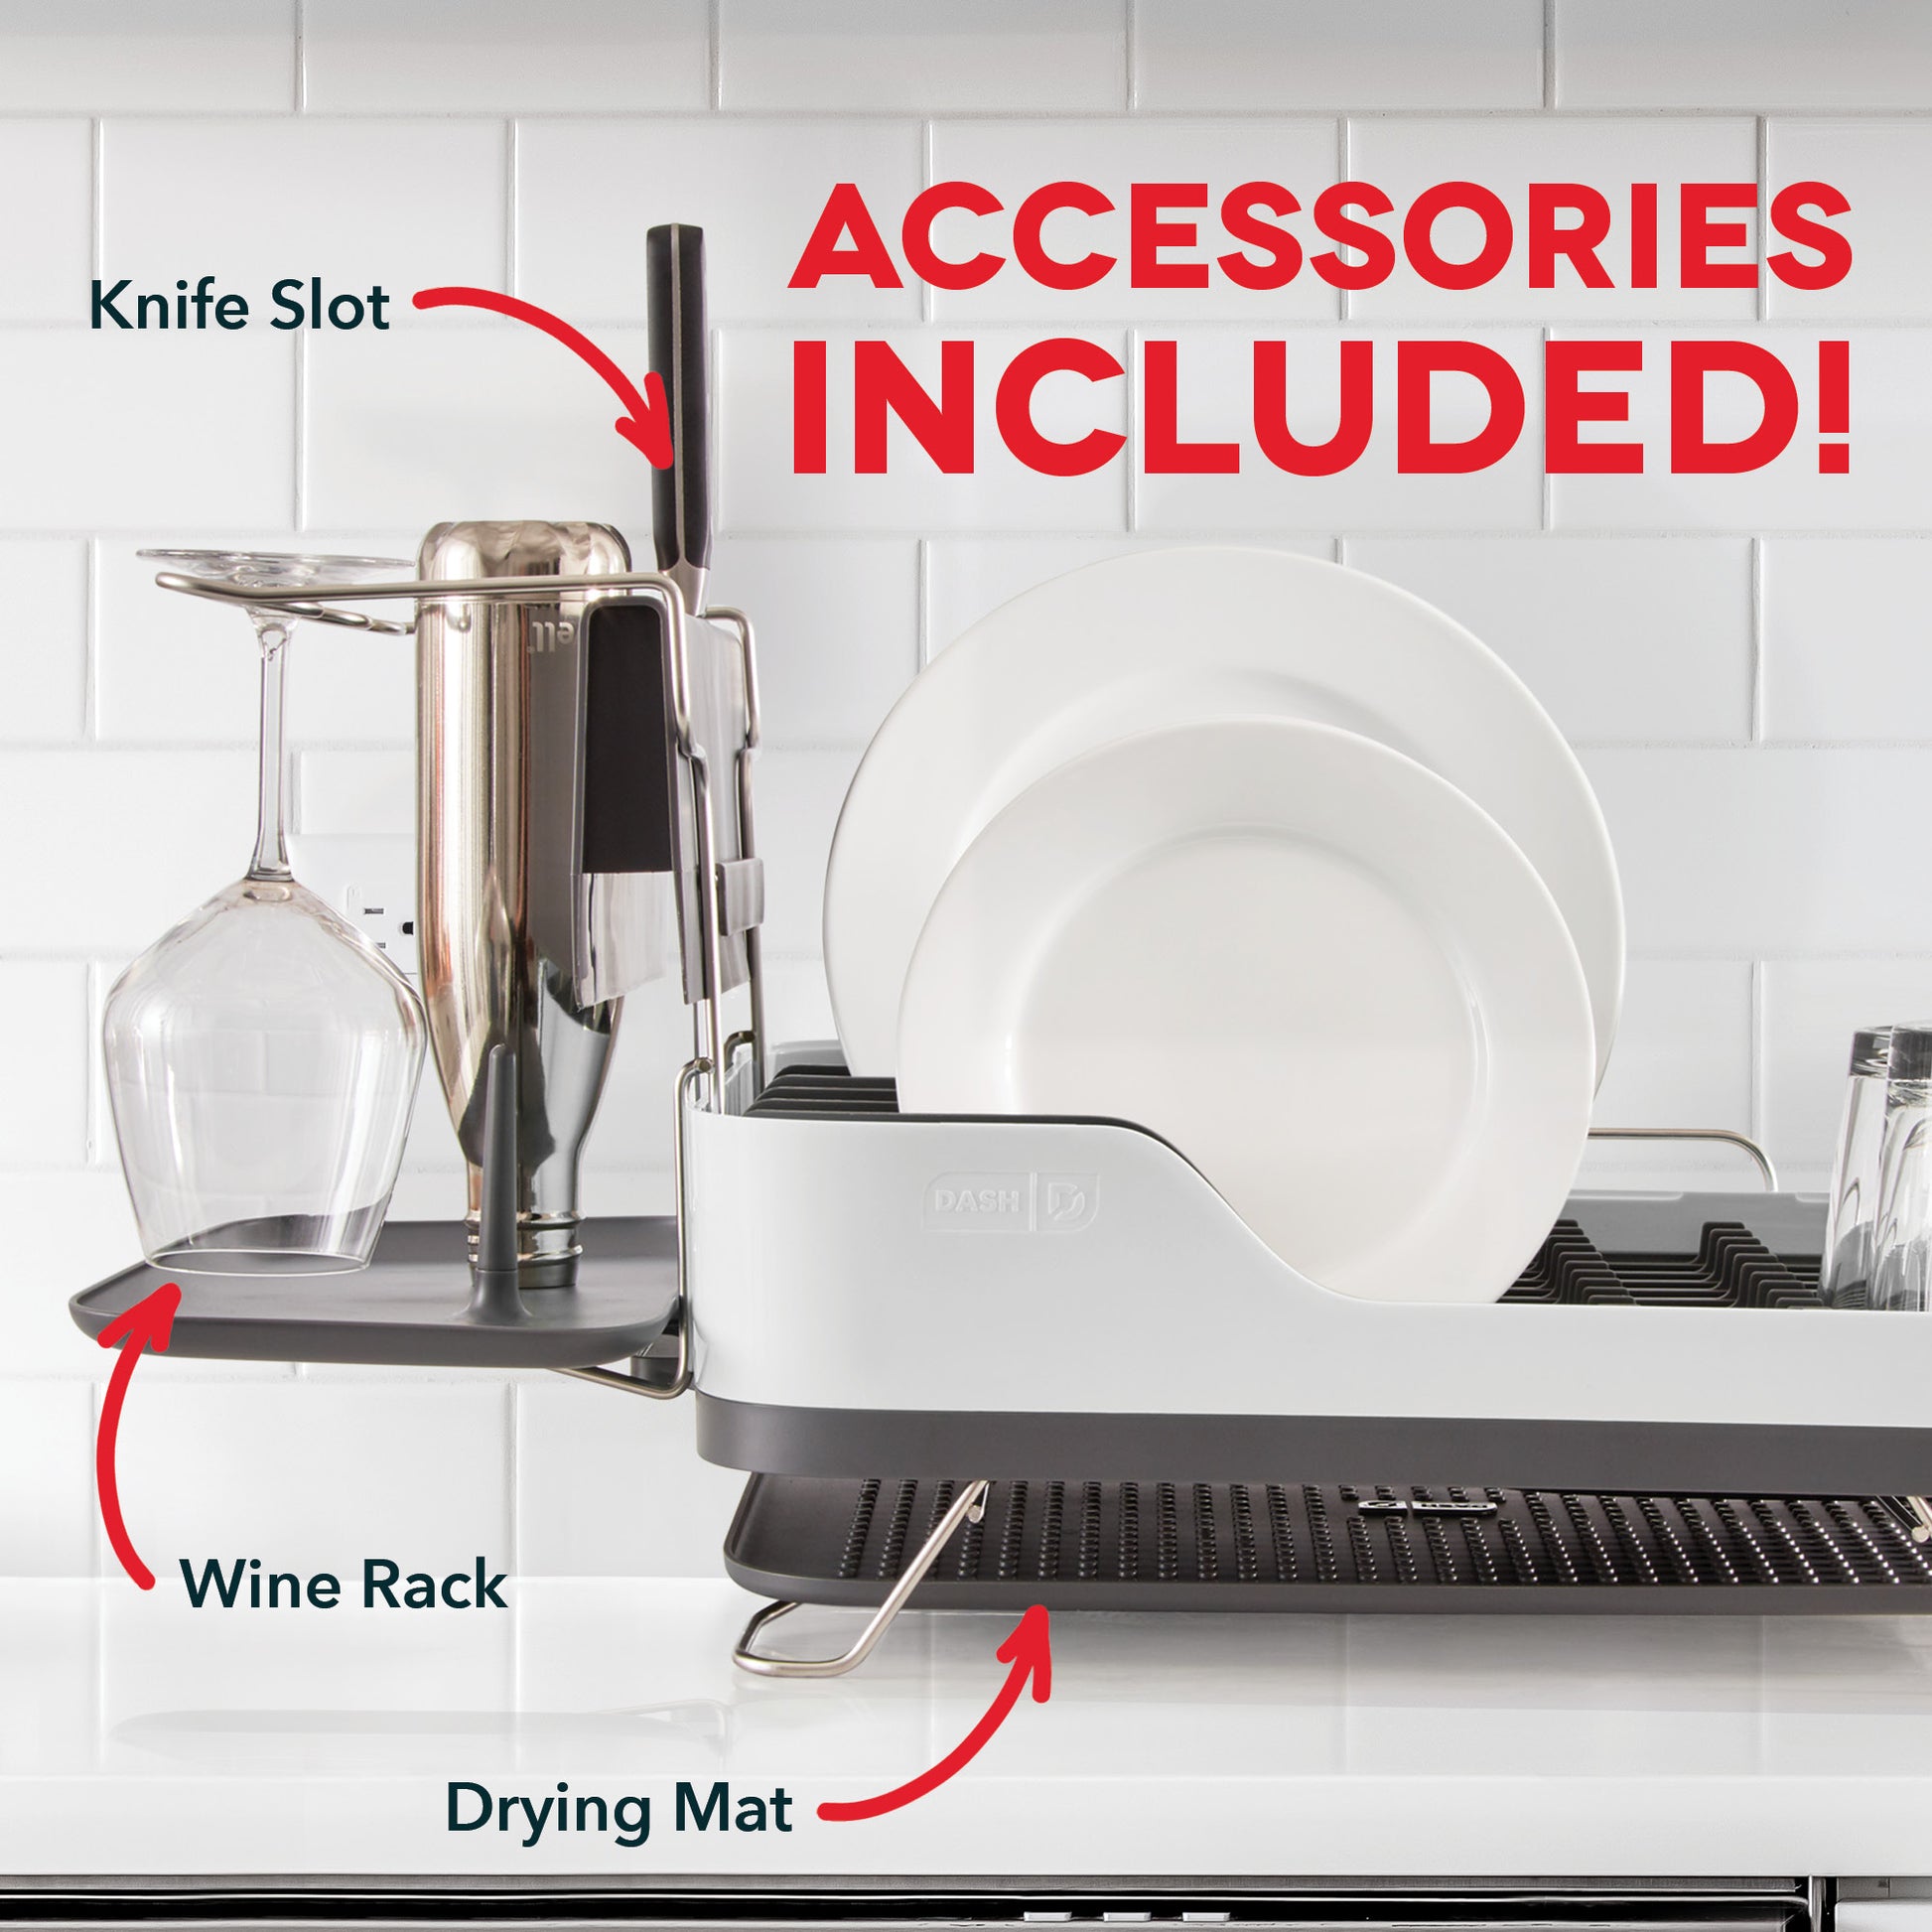 If You're Short on Counter Space, This Clever Dish Drying Mat-Rack